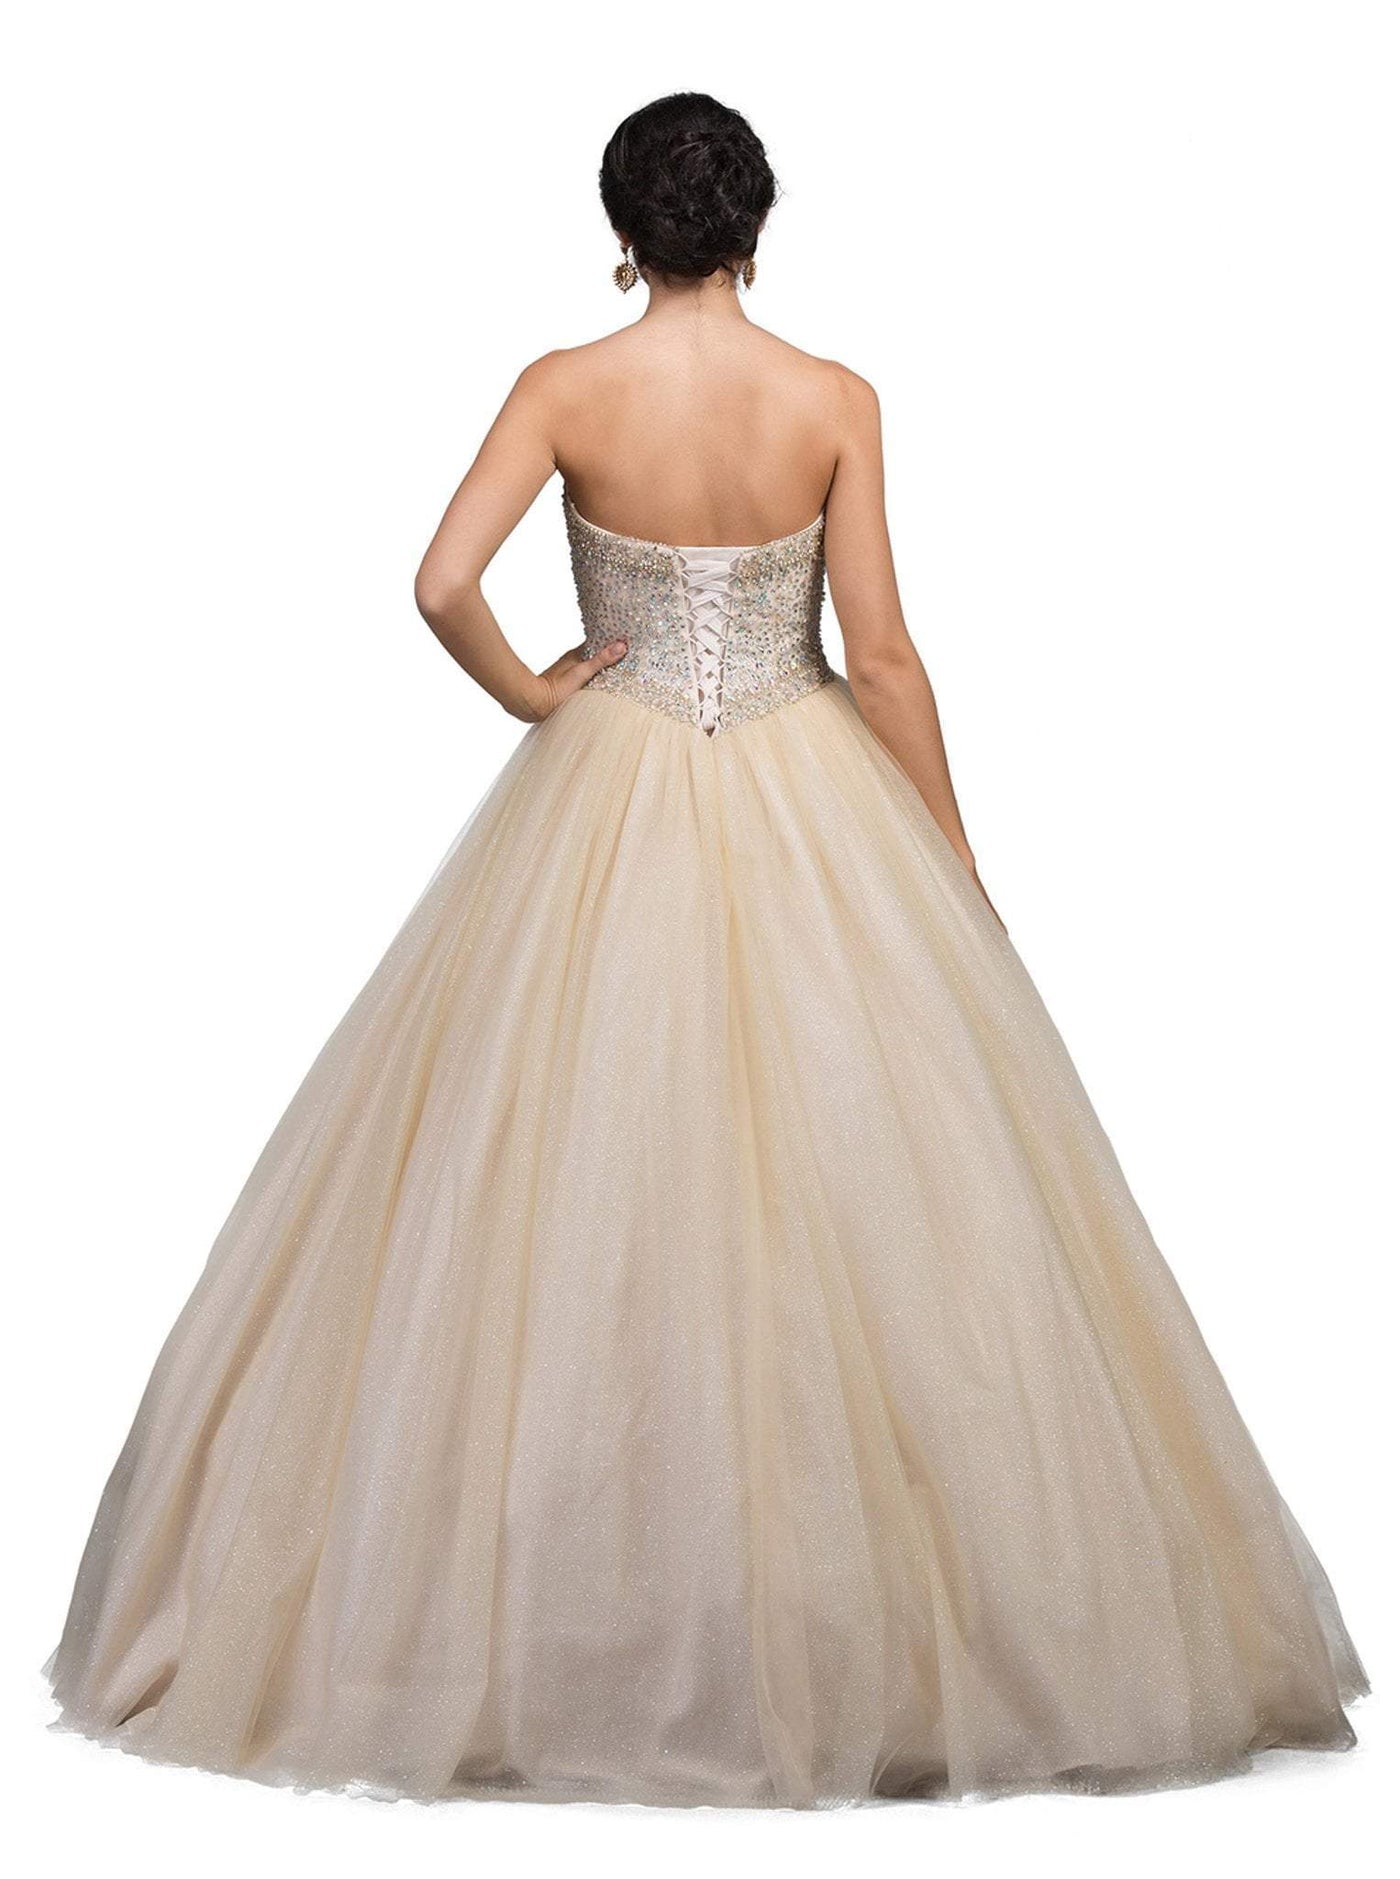 Dancing Queen - 1226 Strapless Bejeweled Sweetheart Quinceanera Ballgown Special Occasion Dress M / Champagne